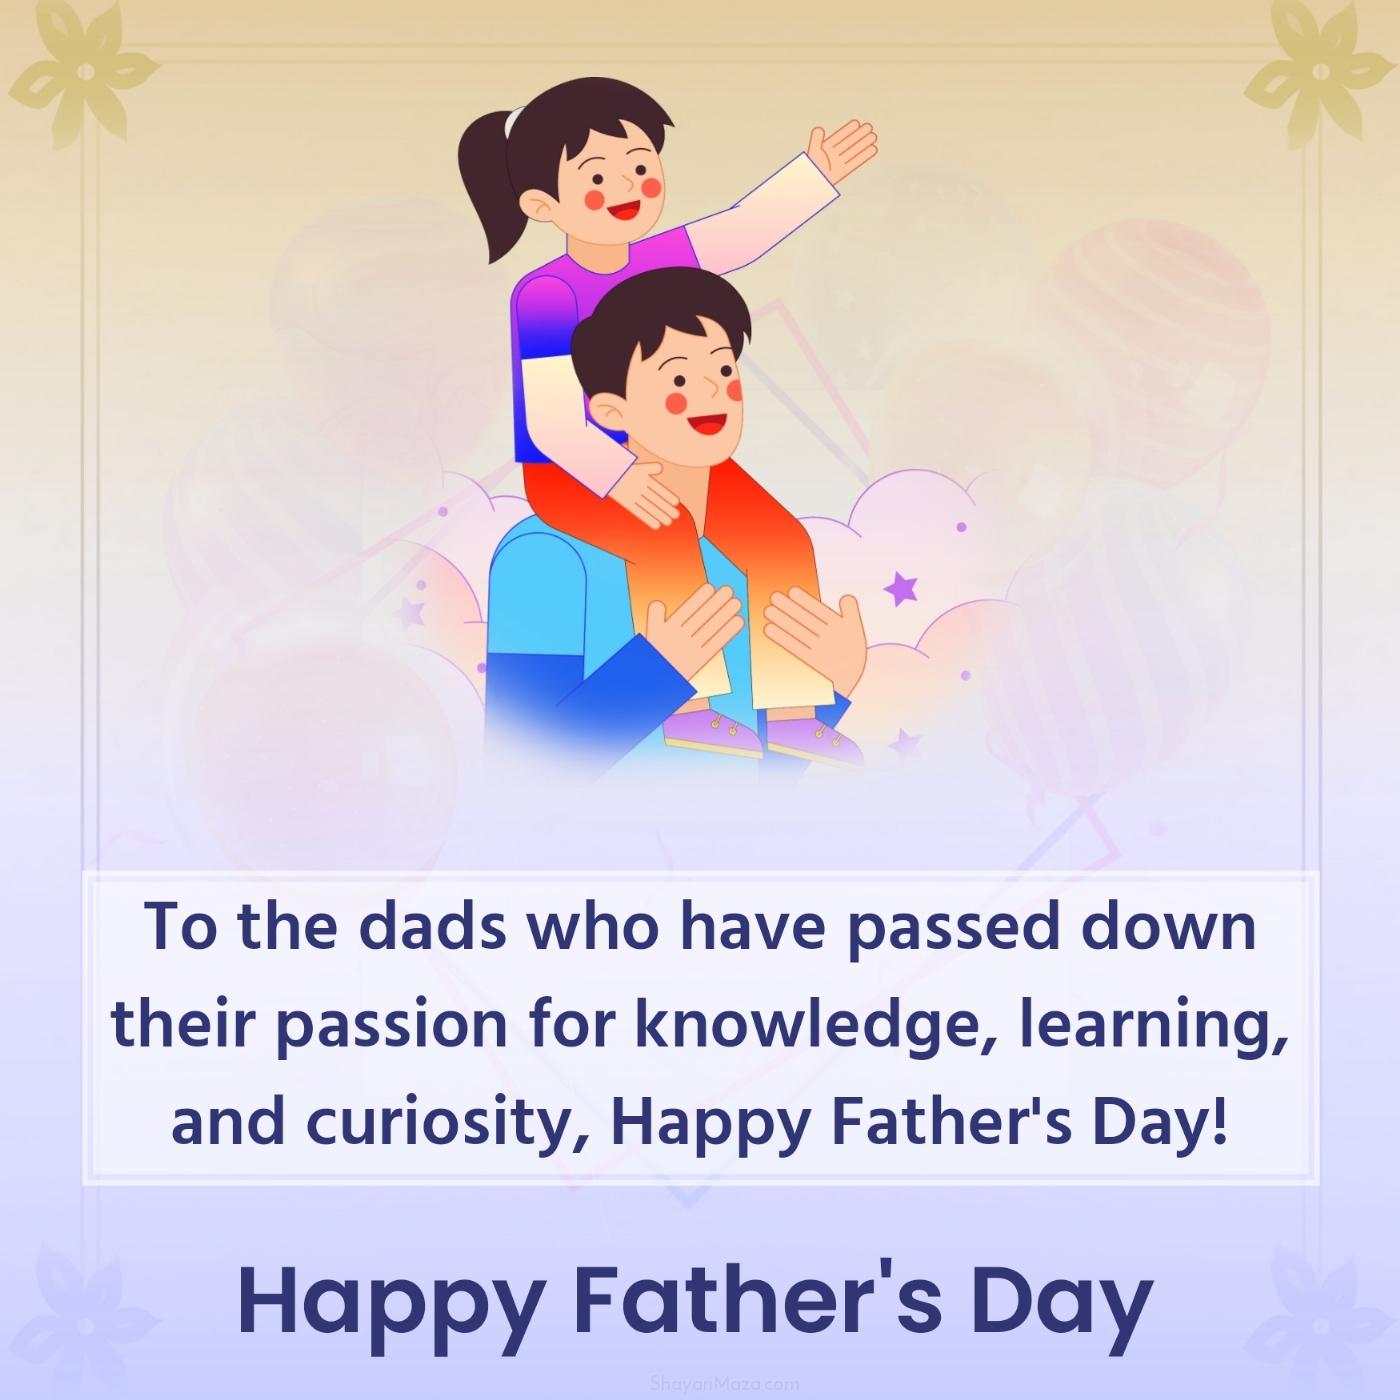 To the dads who have passed down their passion for knowledge